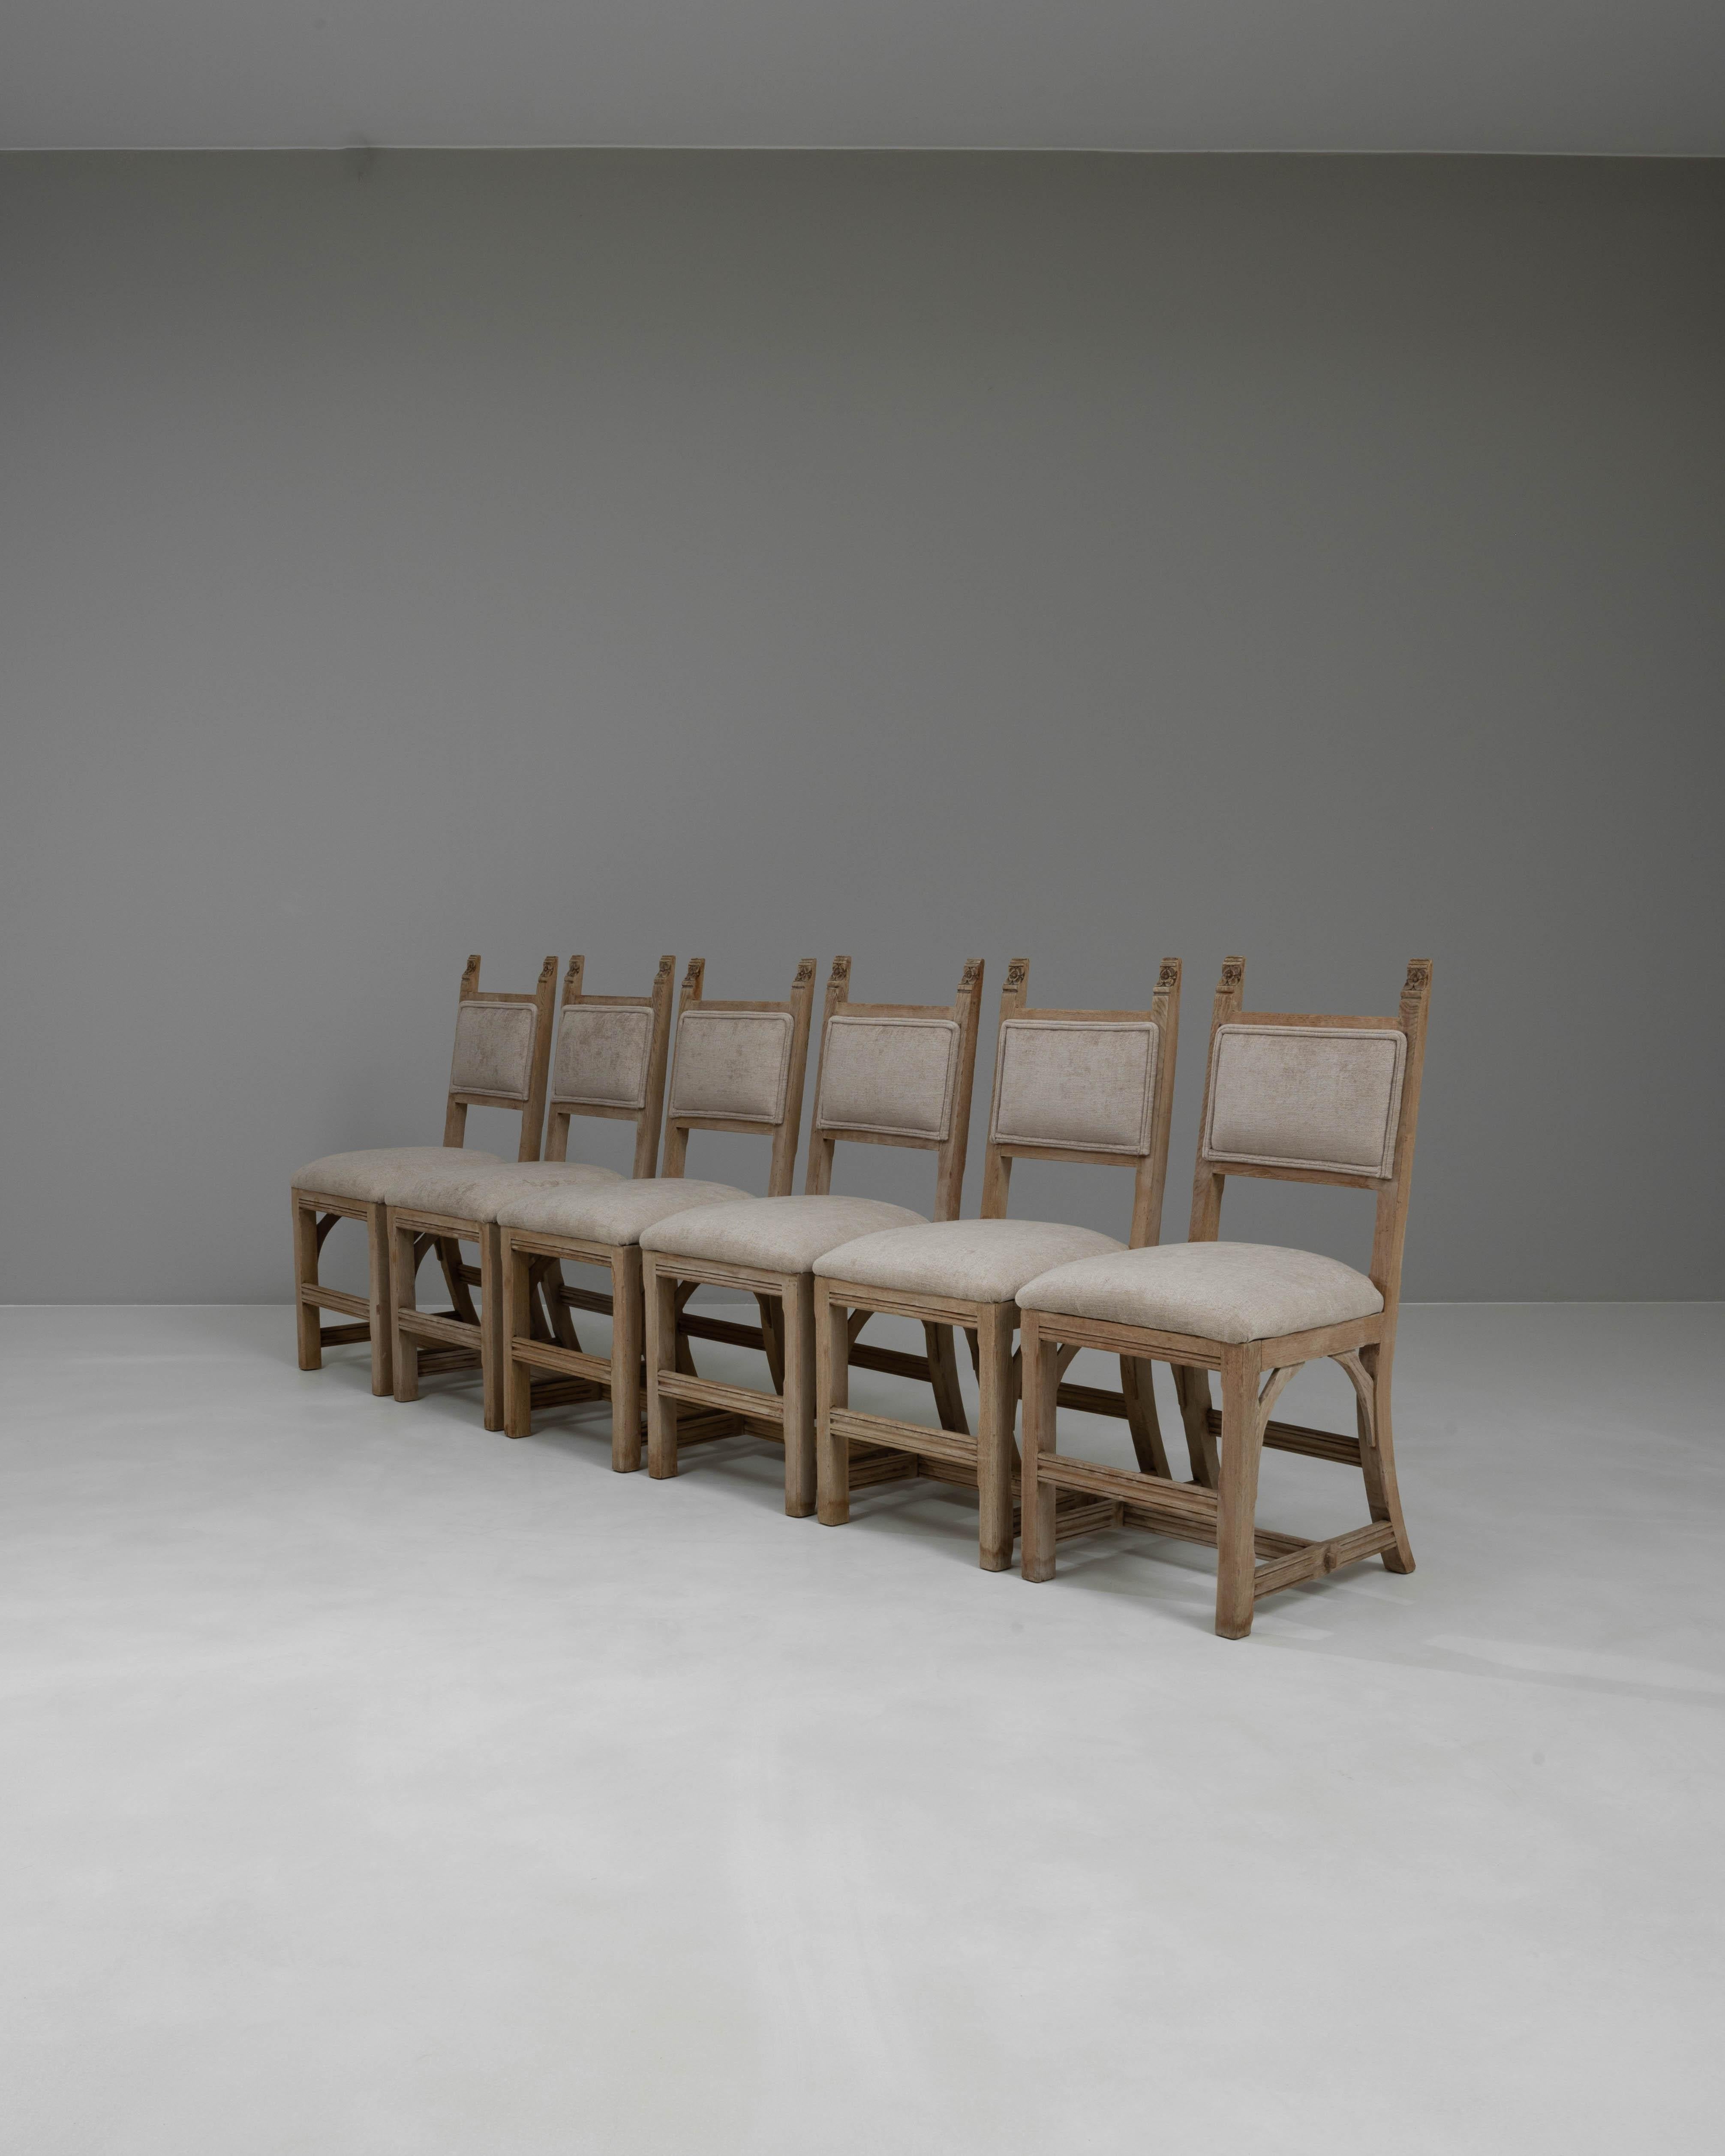 20th Century French Bleached Oak Dining Chairs With Upholstered Seats, Set of 6 For Sale 4